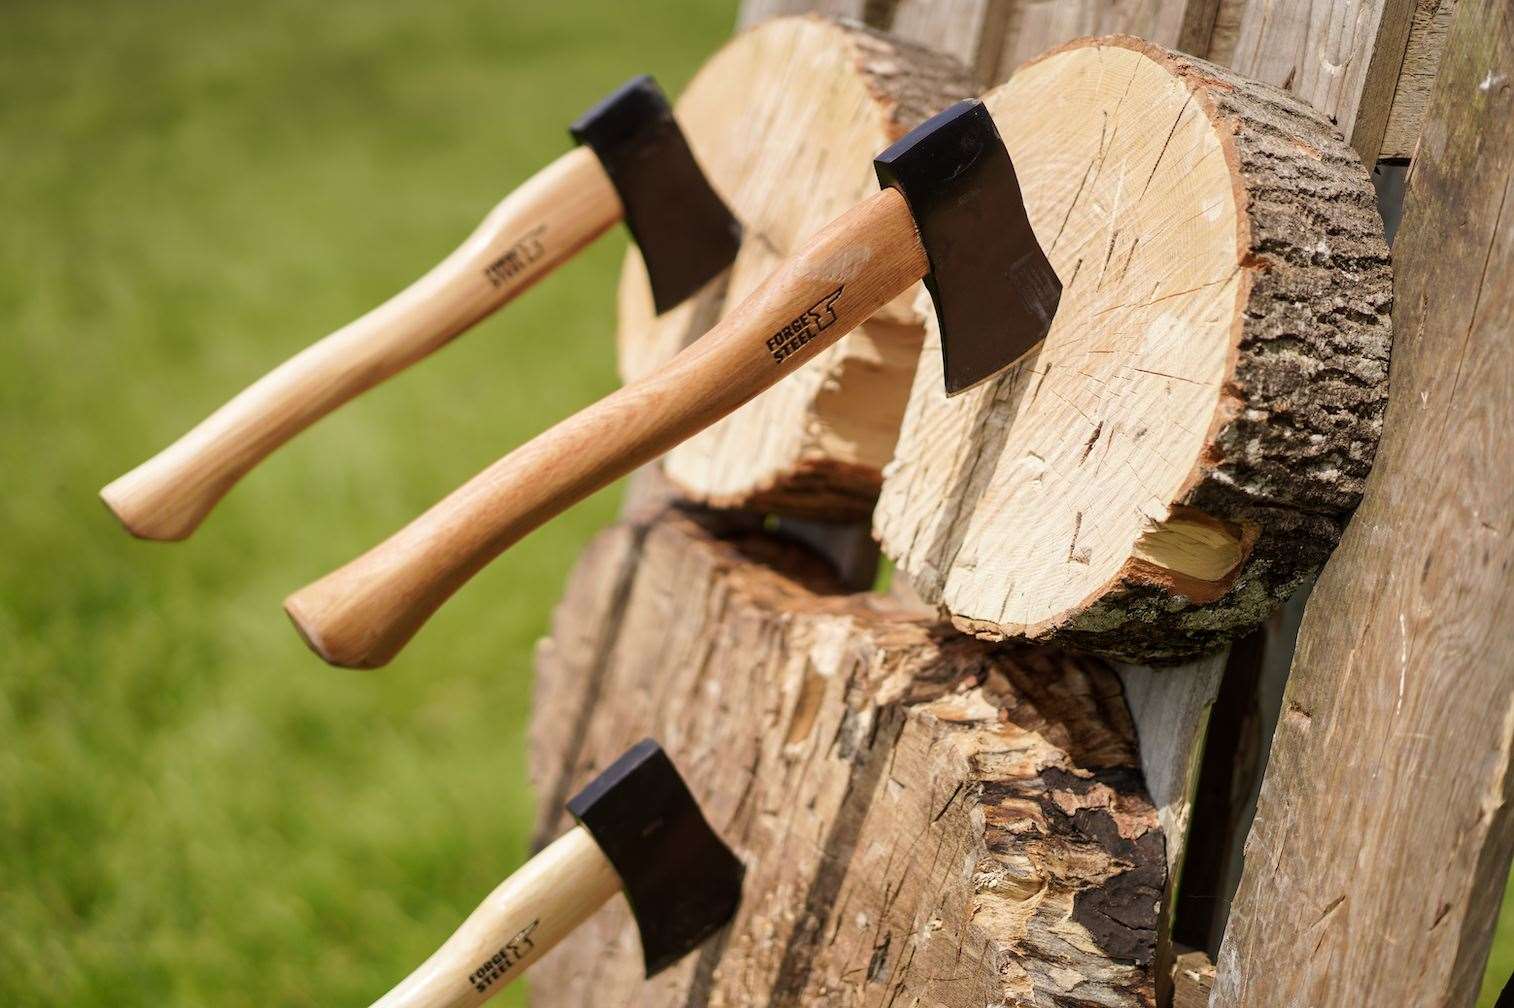 You could try axe throwing at Penshurst Place Picture: Joe's Bows